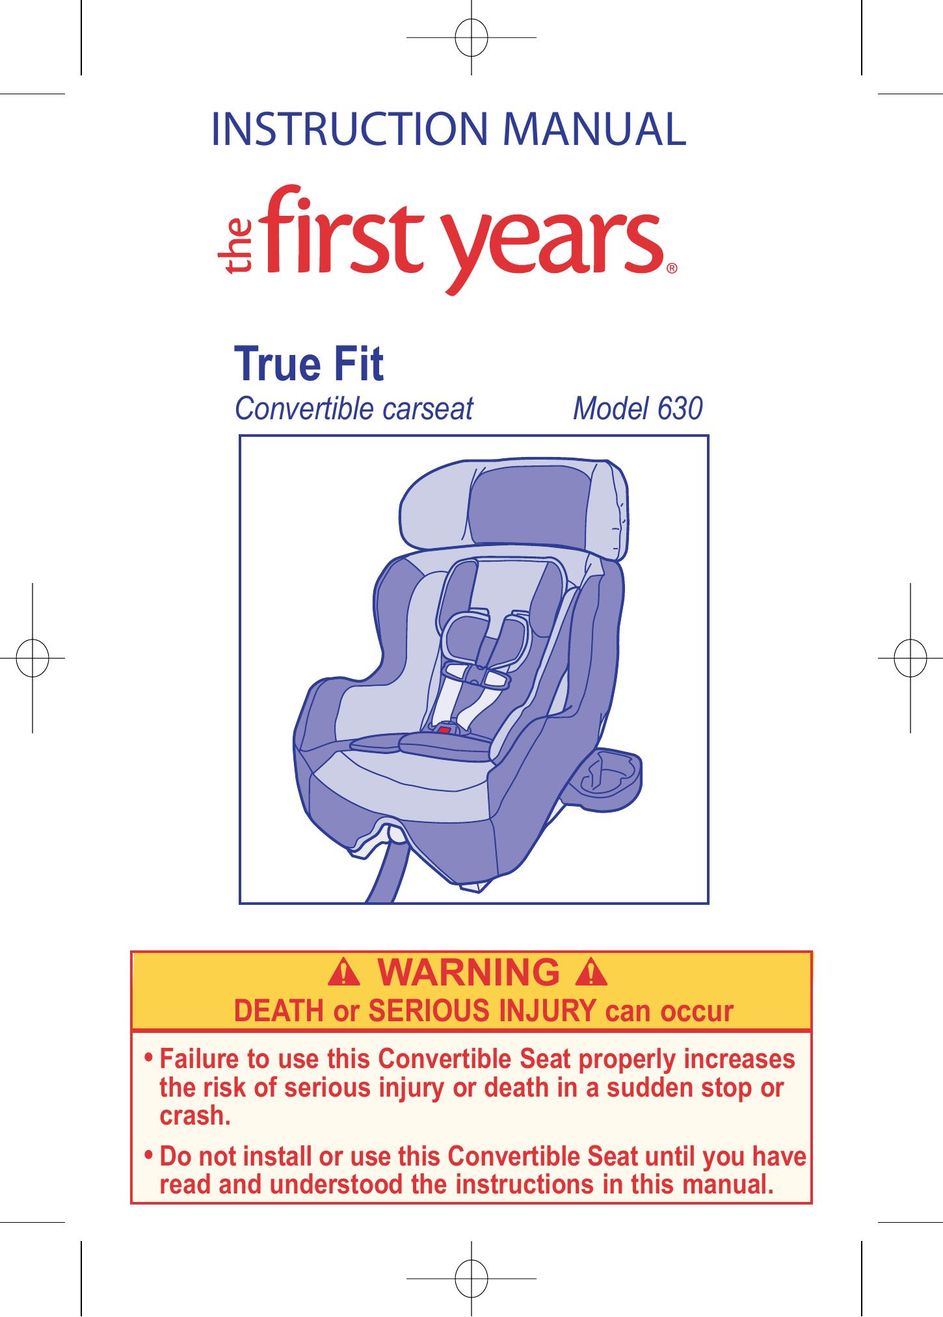 The First Years 630 Car Seat User Manual